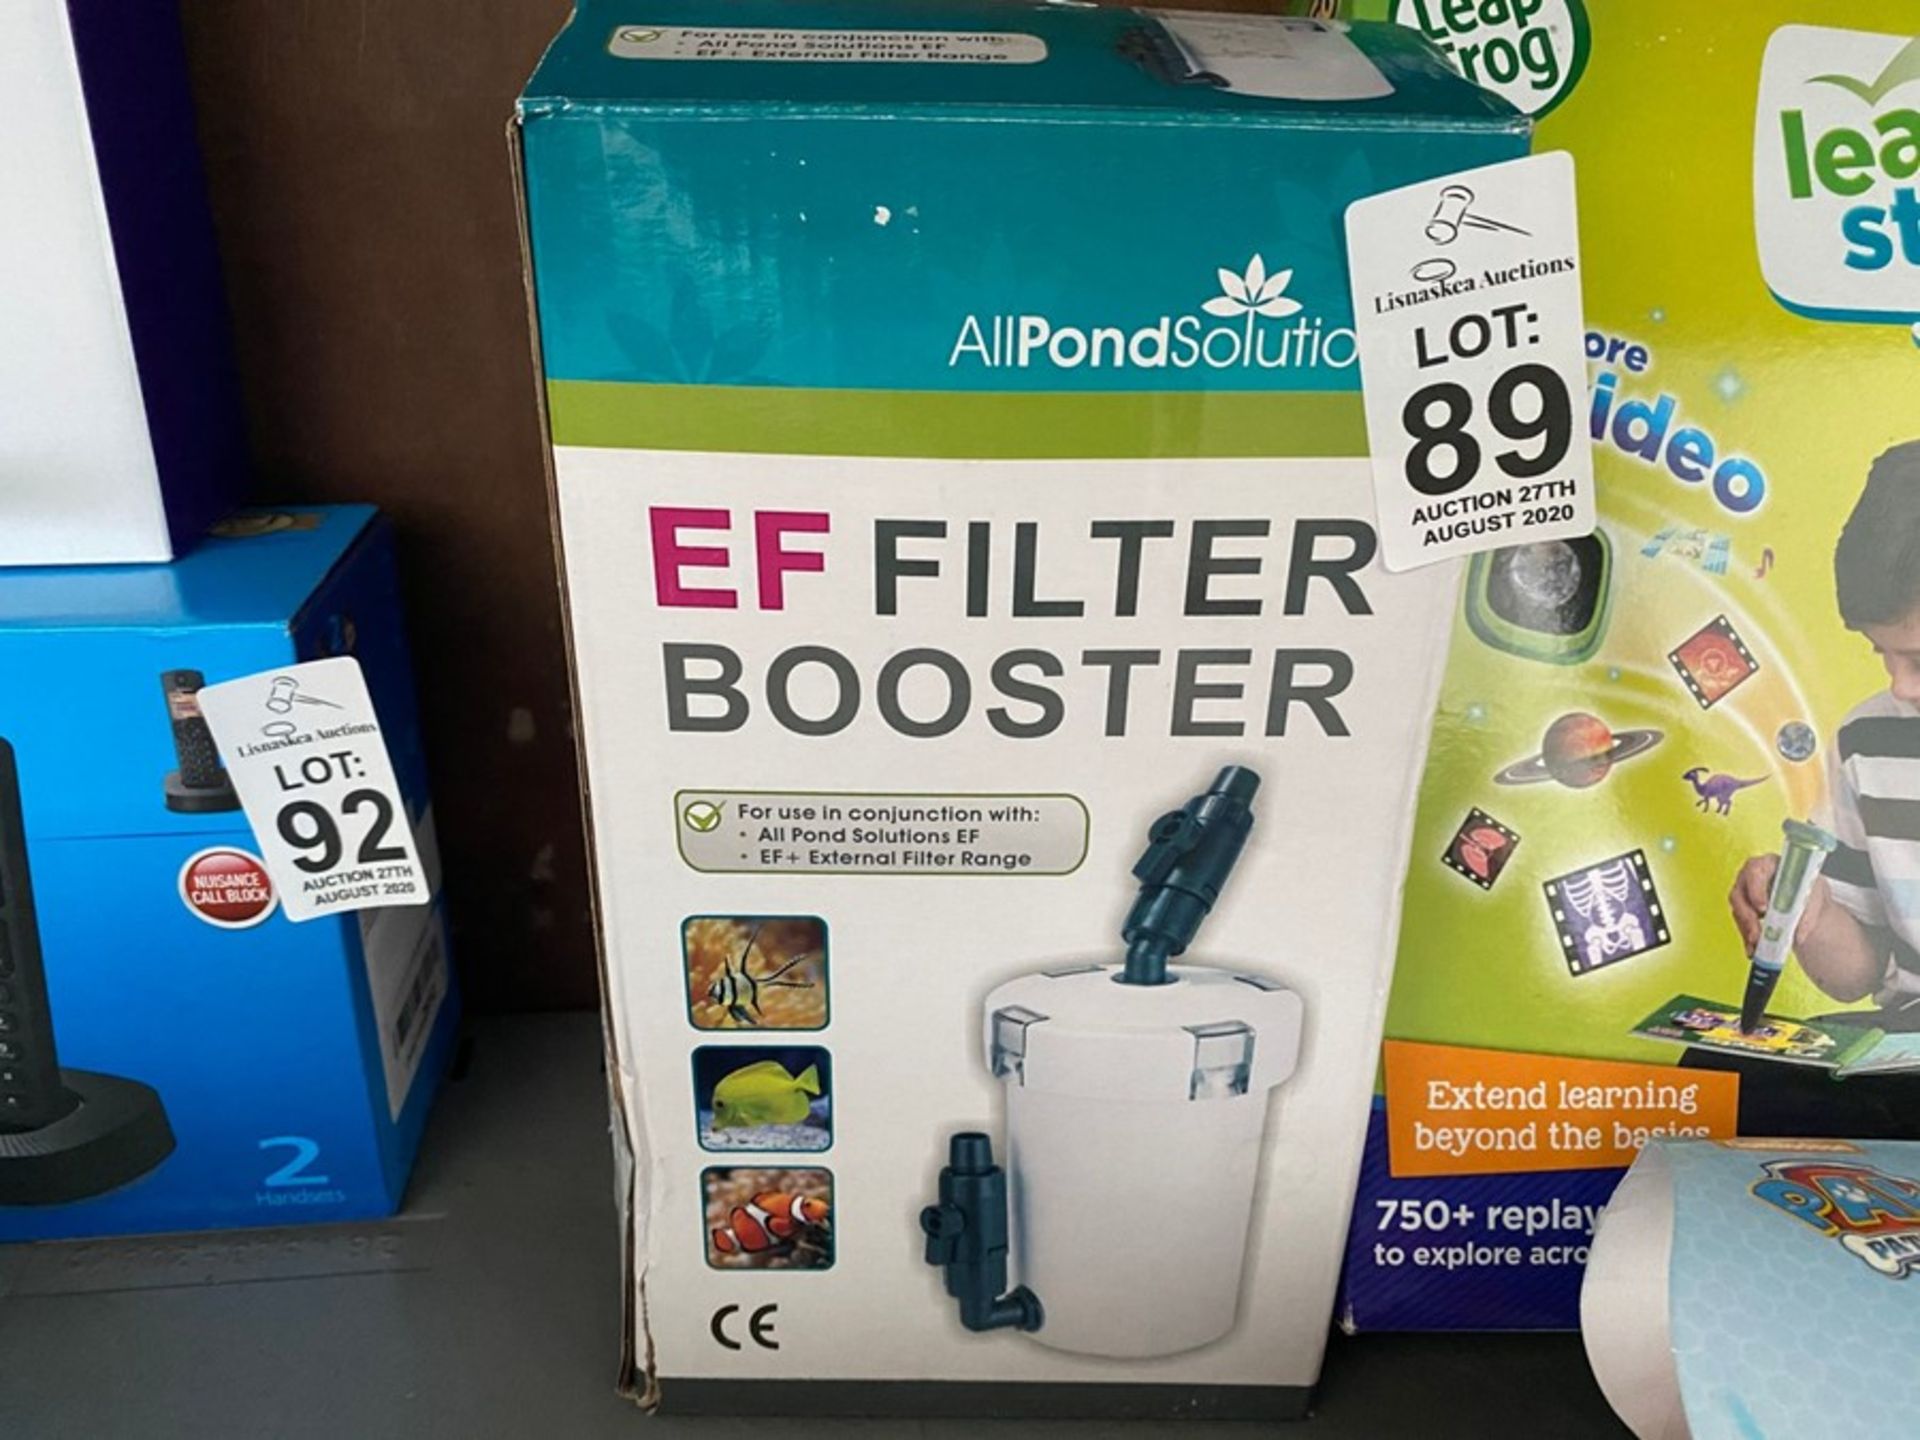 ALL POND SOLUTIONS EF FILTER BOOSTER